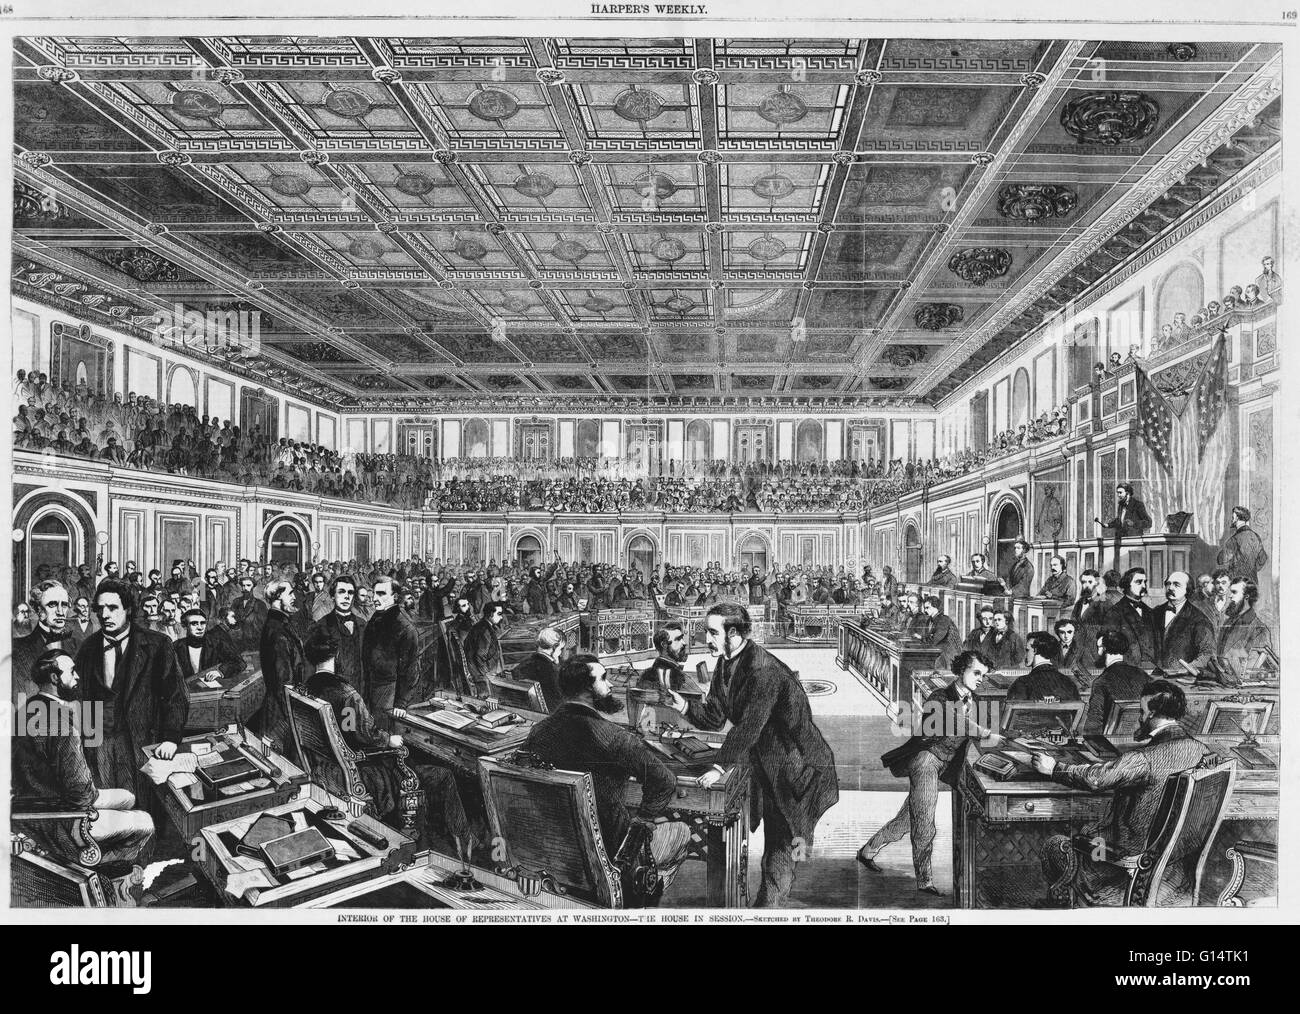 A wood engraving by Theodore R. Davis, published in Harper's Weekly, showing the interior of the House of Representatives in session, 1868. Stock Photo